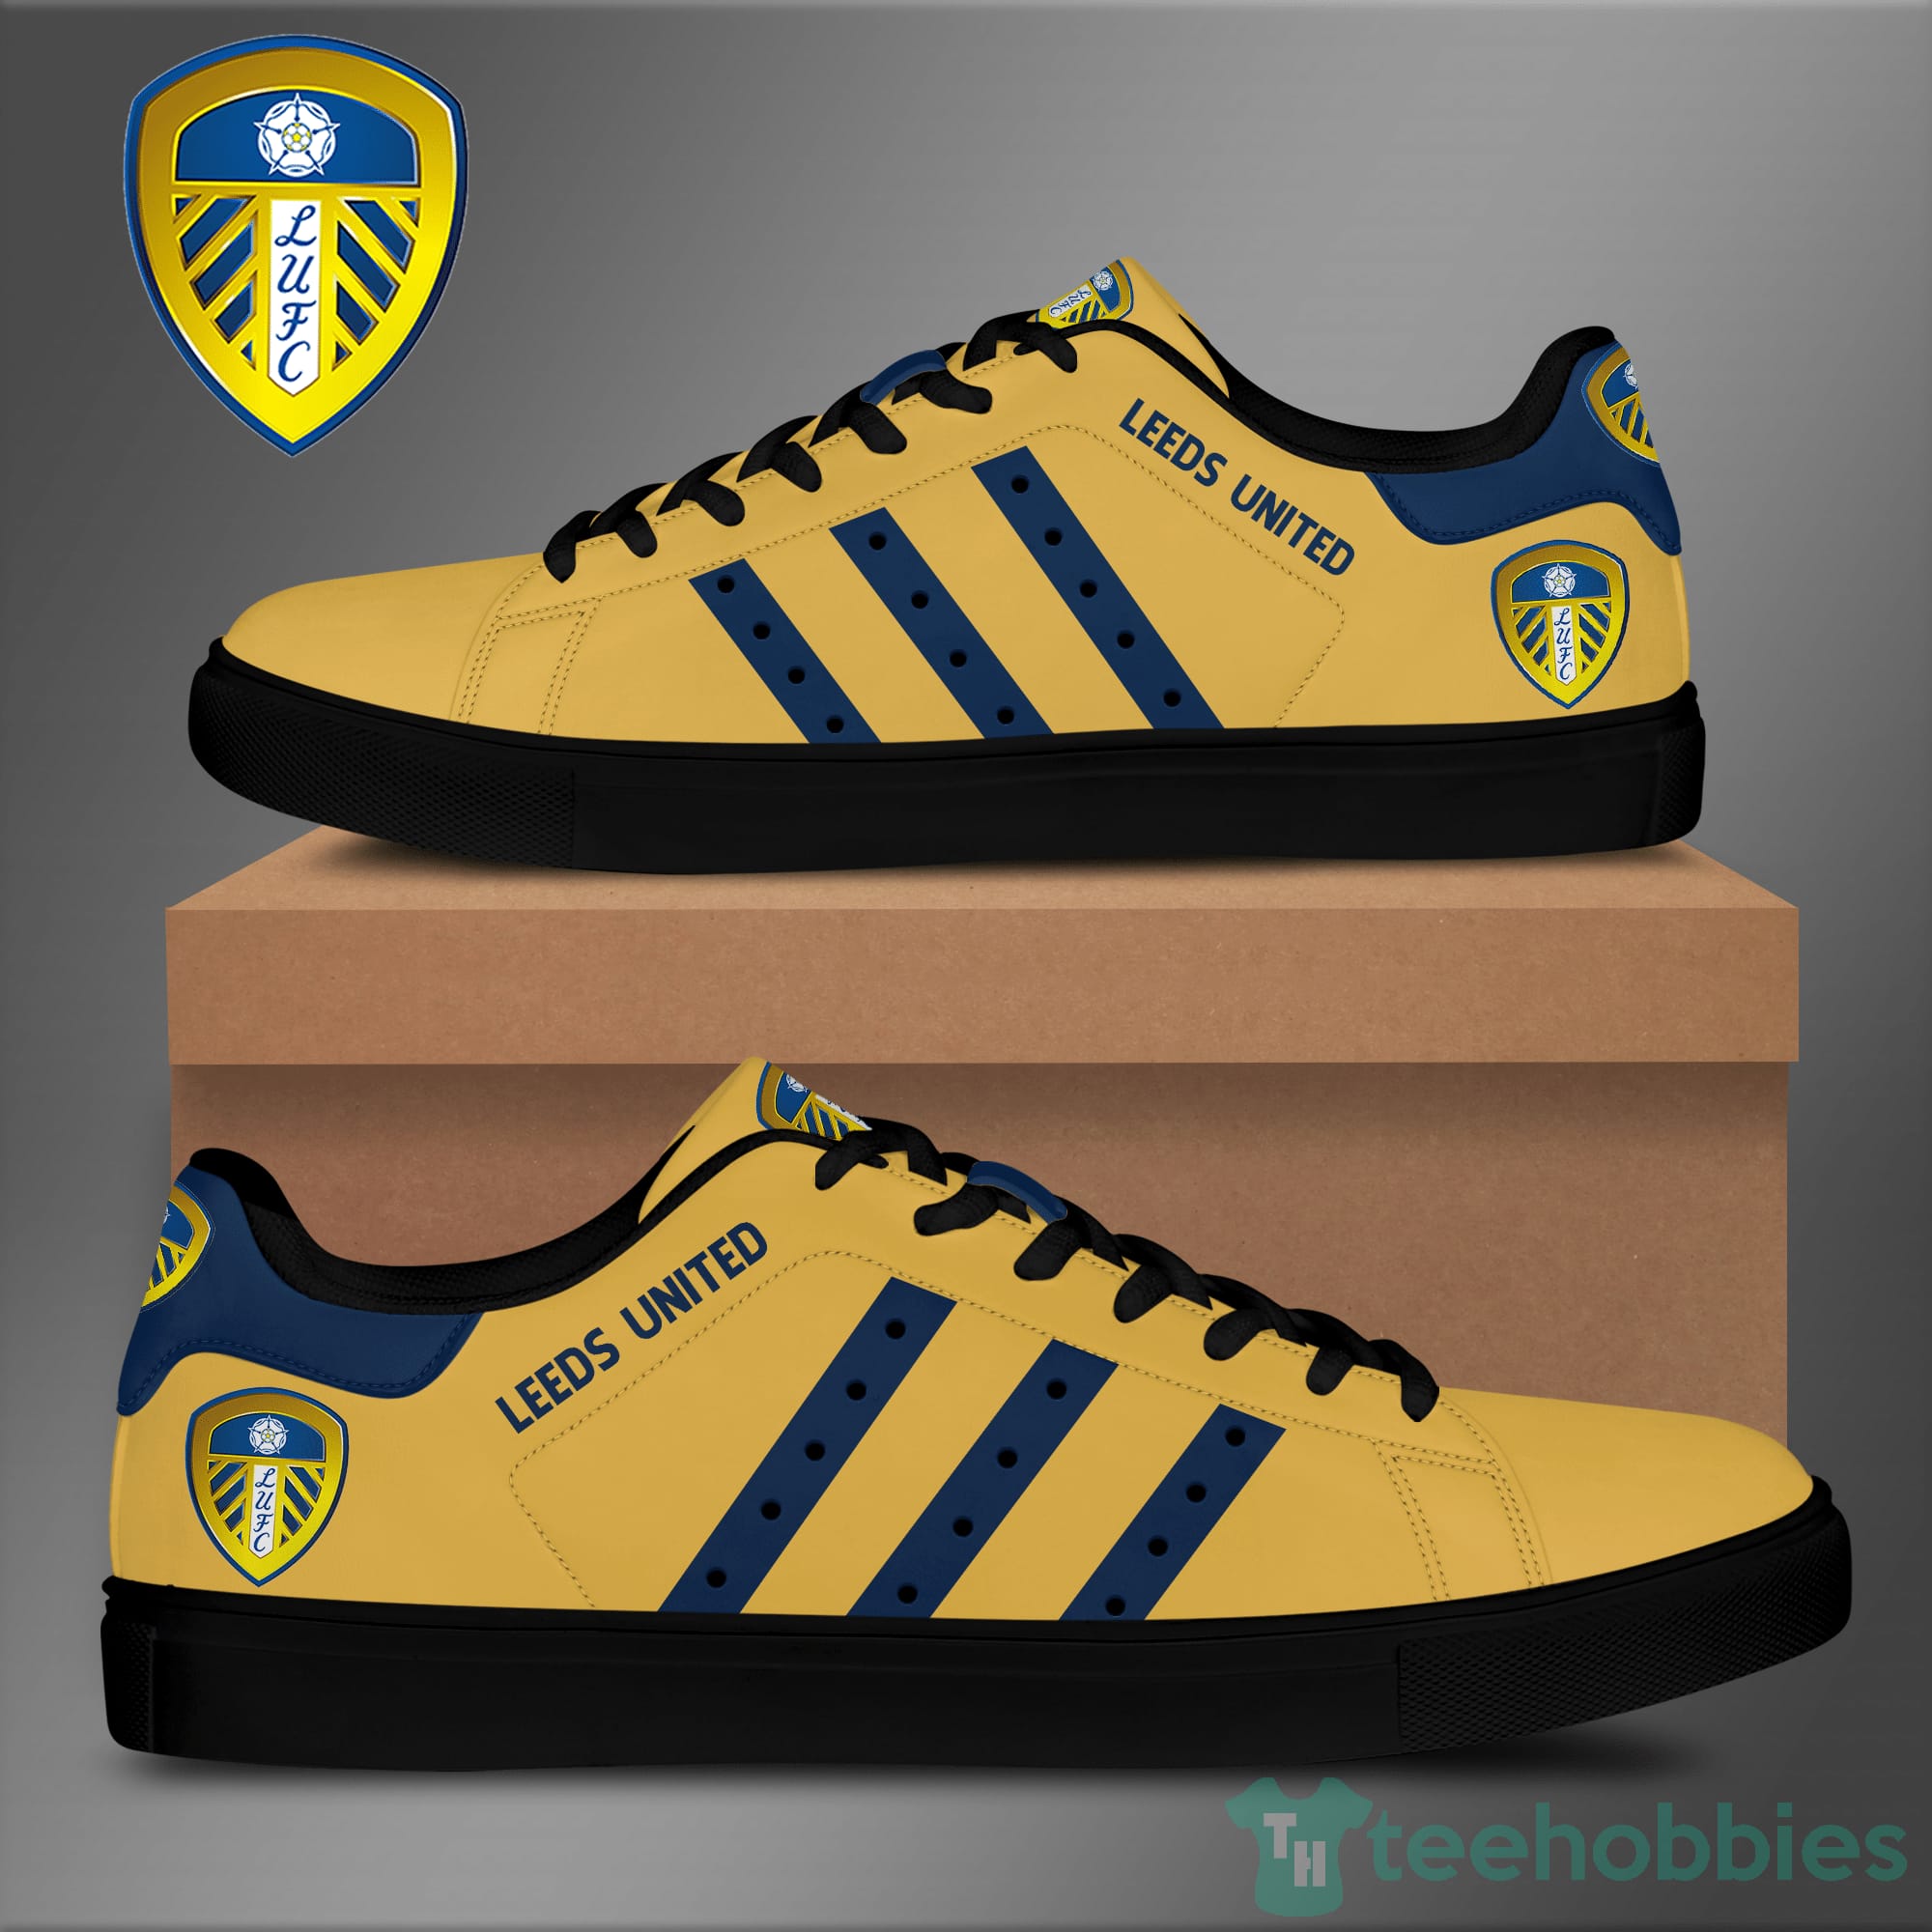 Leeds United Logo Low Top Skate Shoes Product photo 2